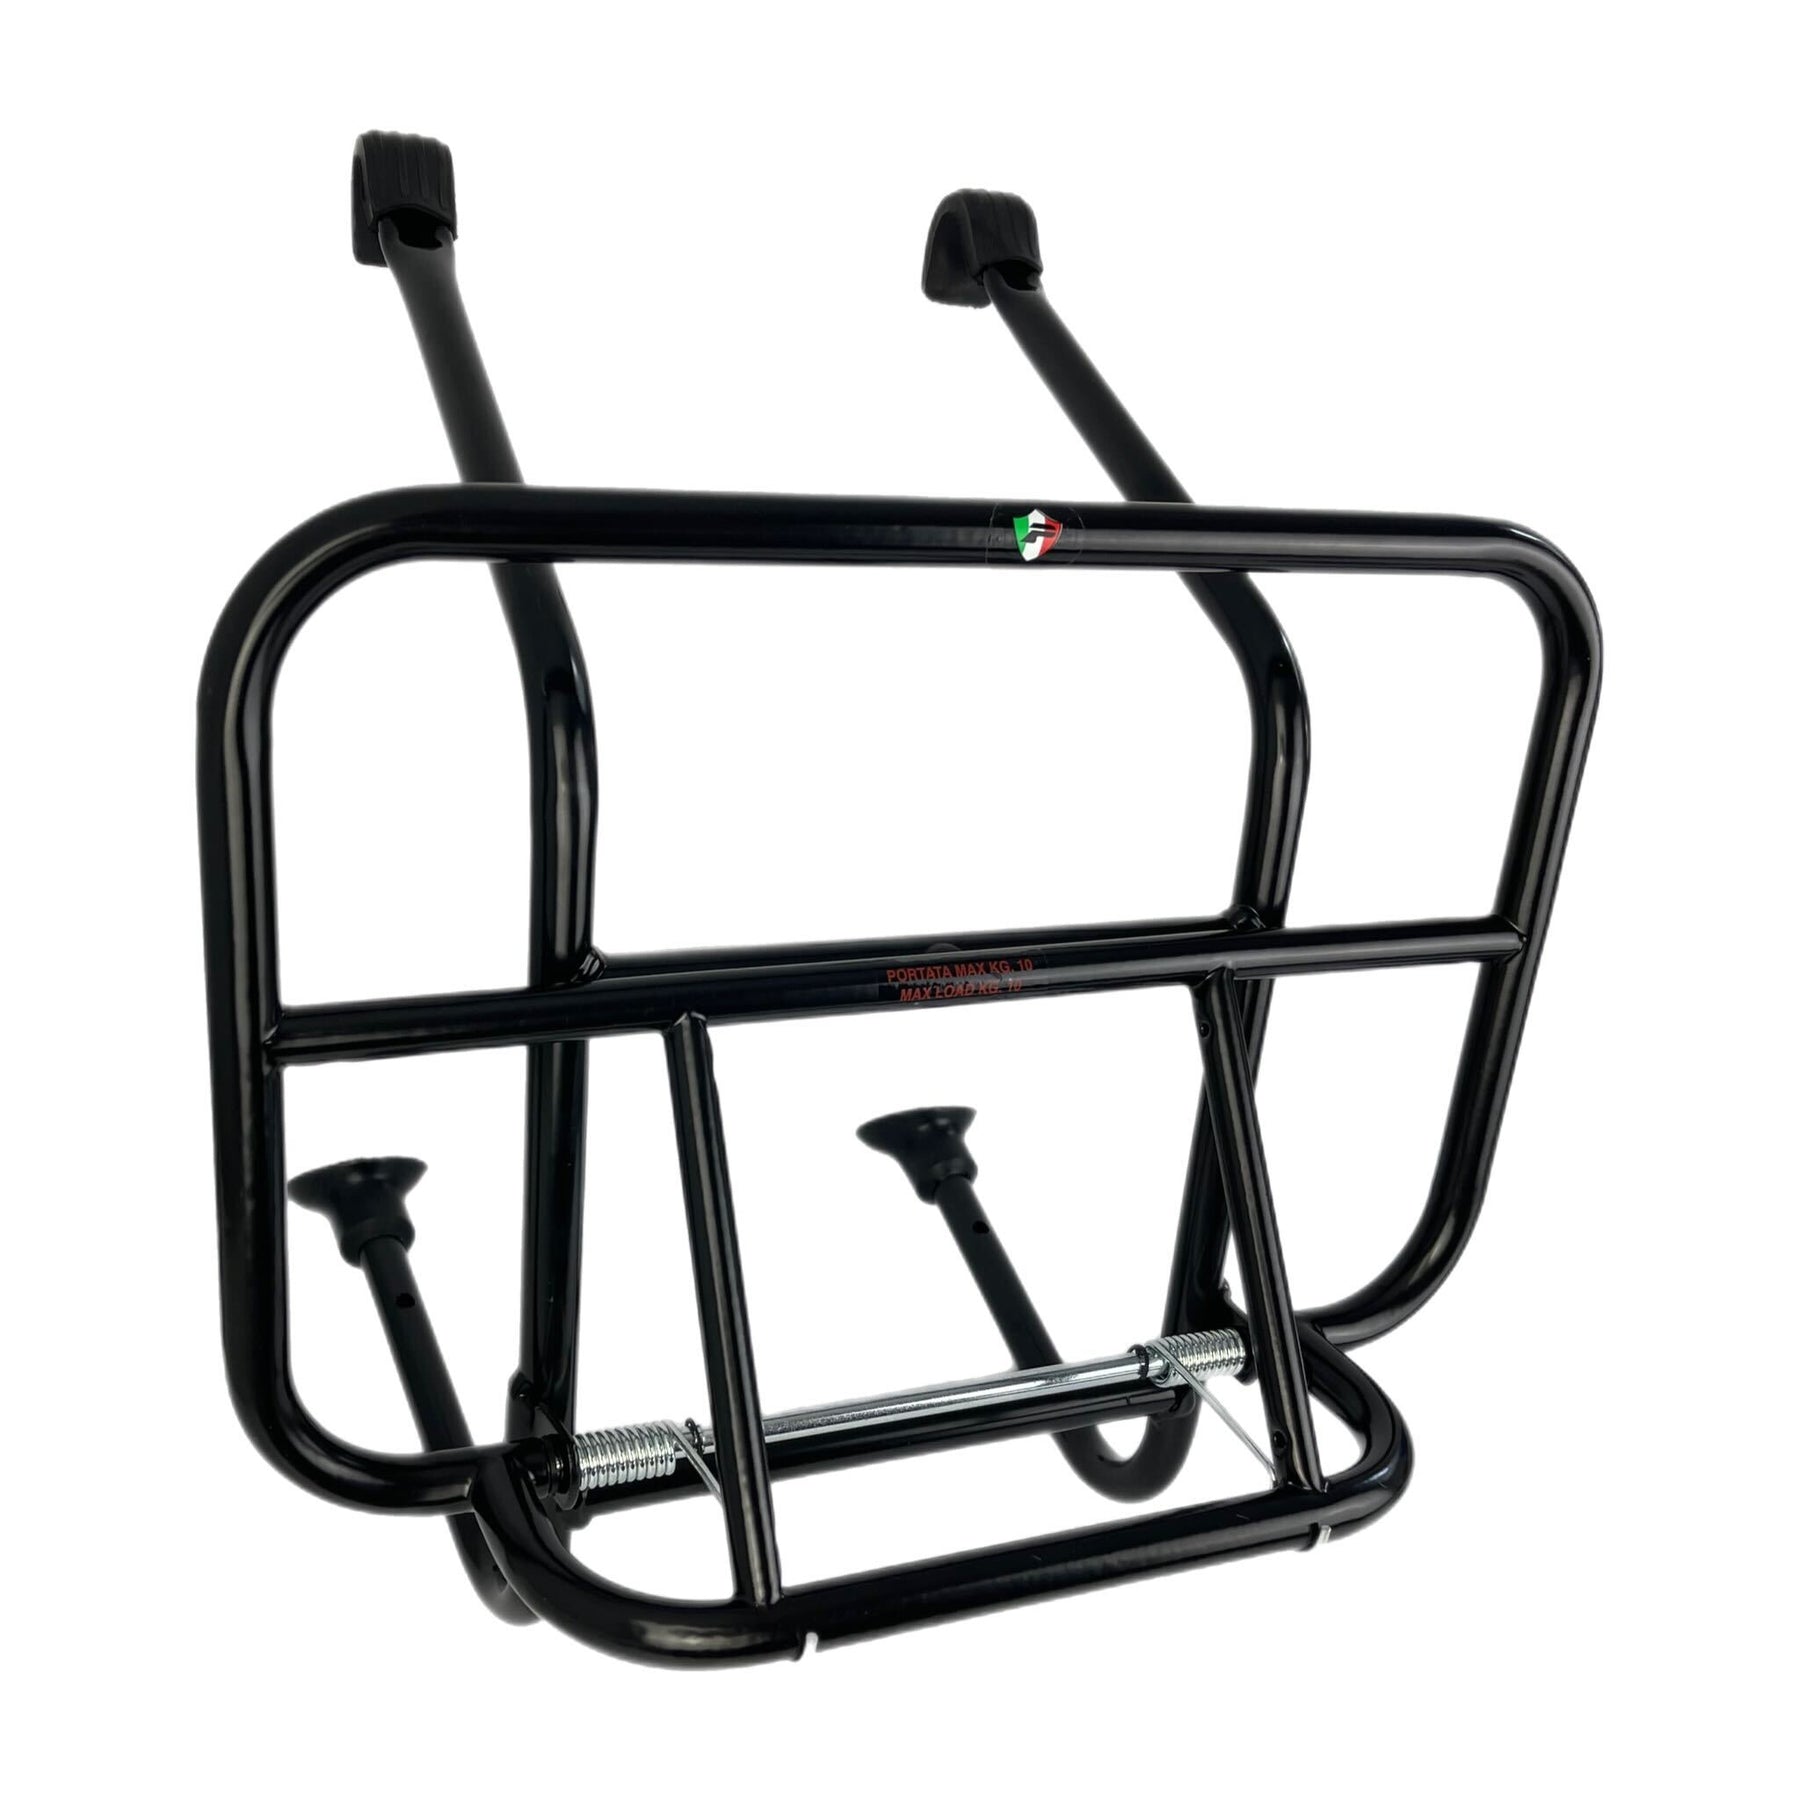 Vespa PX T5 Super Sprint Rally V50 Front Carrier Deep Type - Black Cuppini